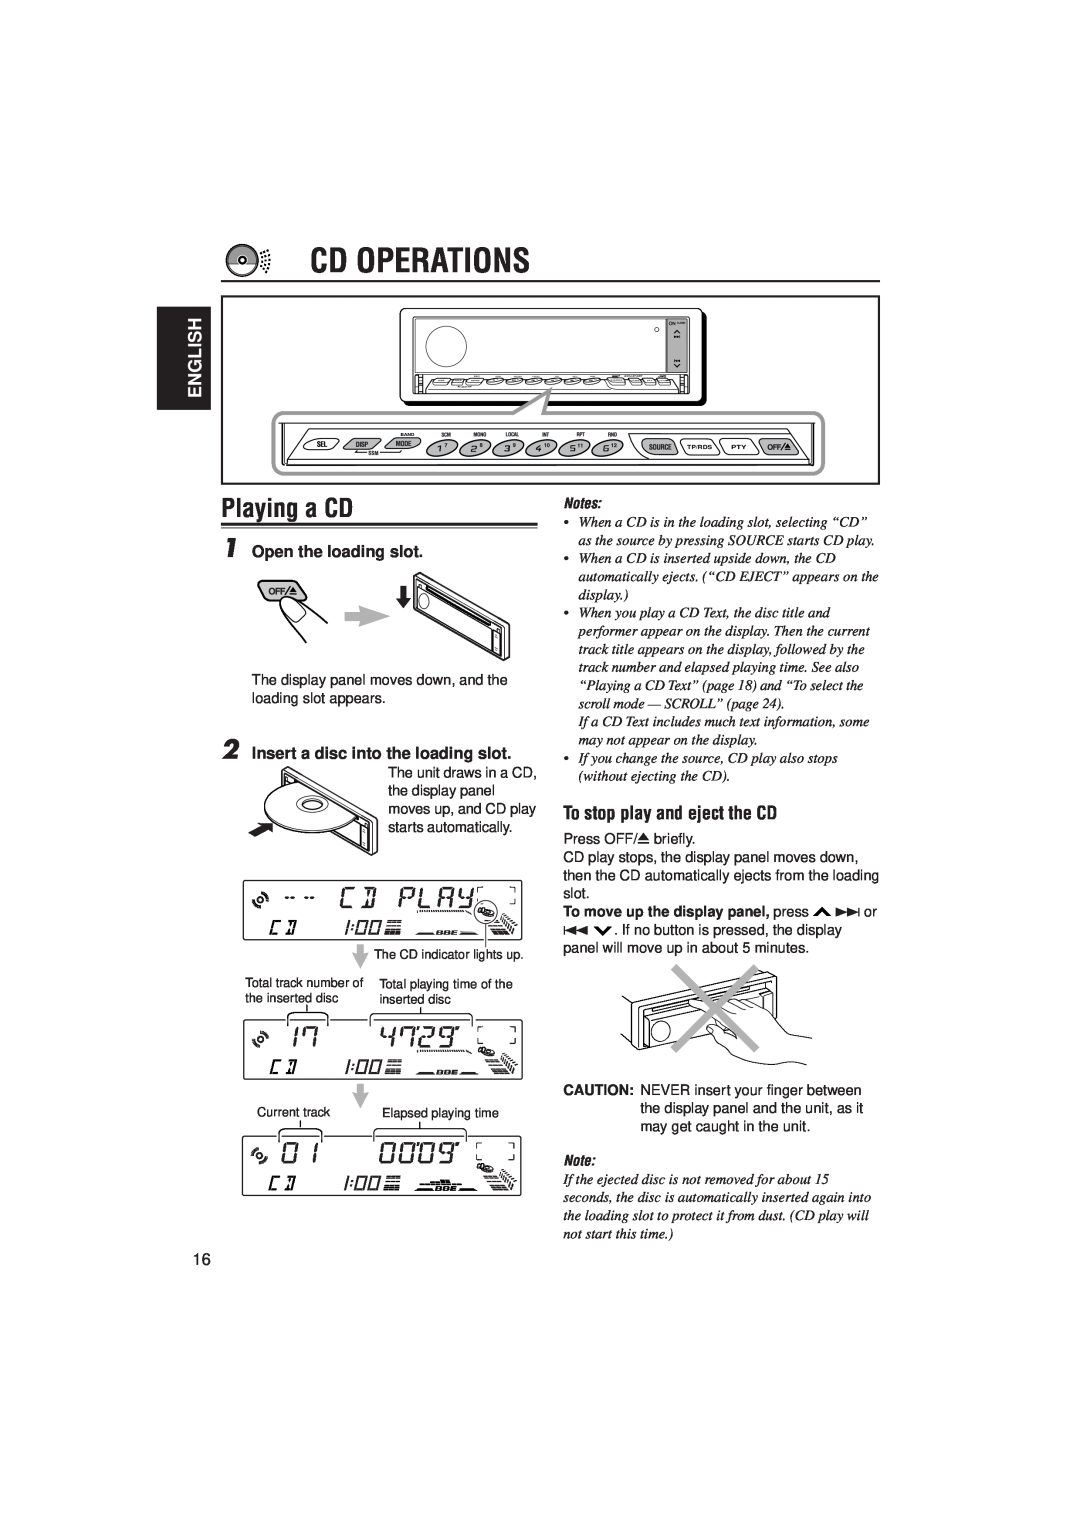 JVC KD-LX330R manual Cd Operations, Playing a CD, English, To stop play and eject the CD, Open the loading slot 